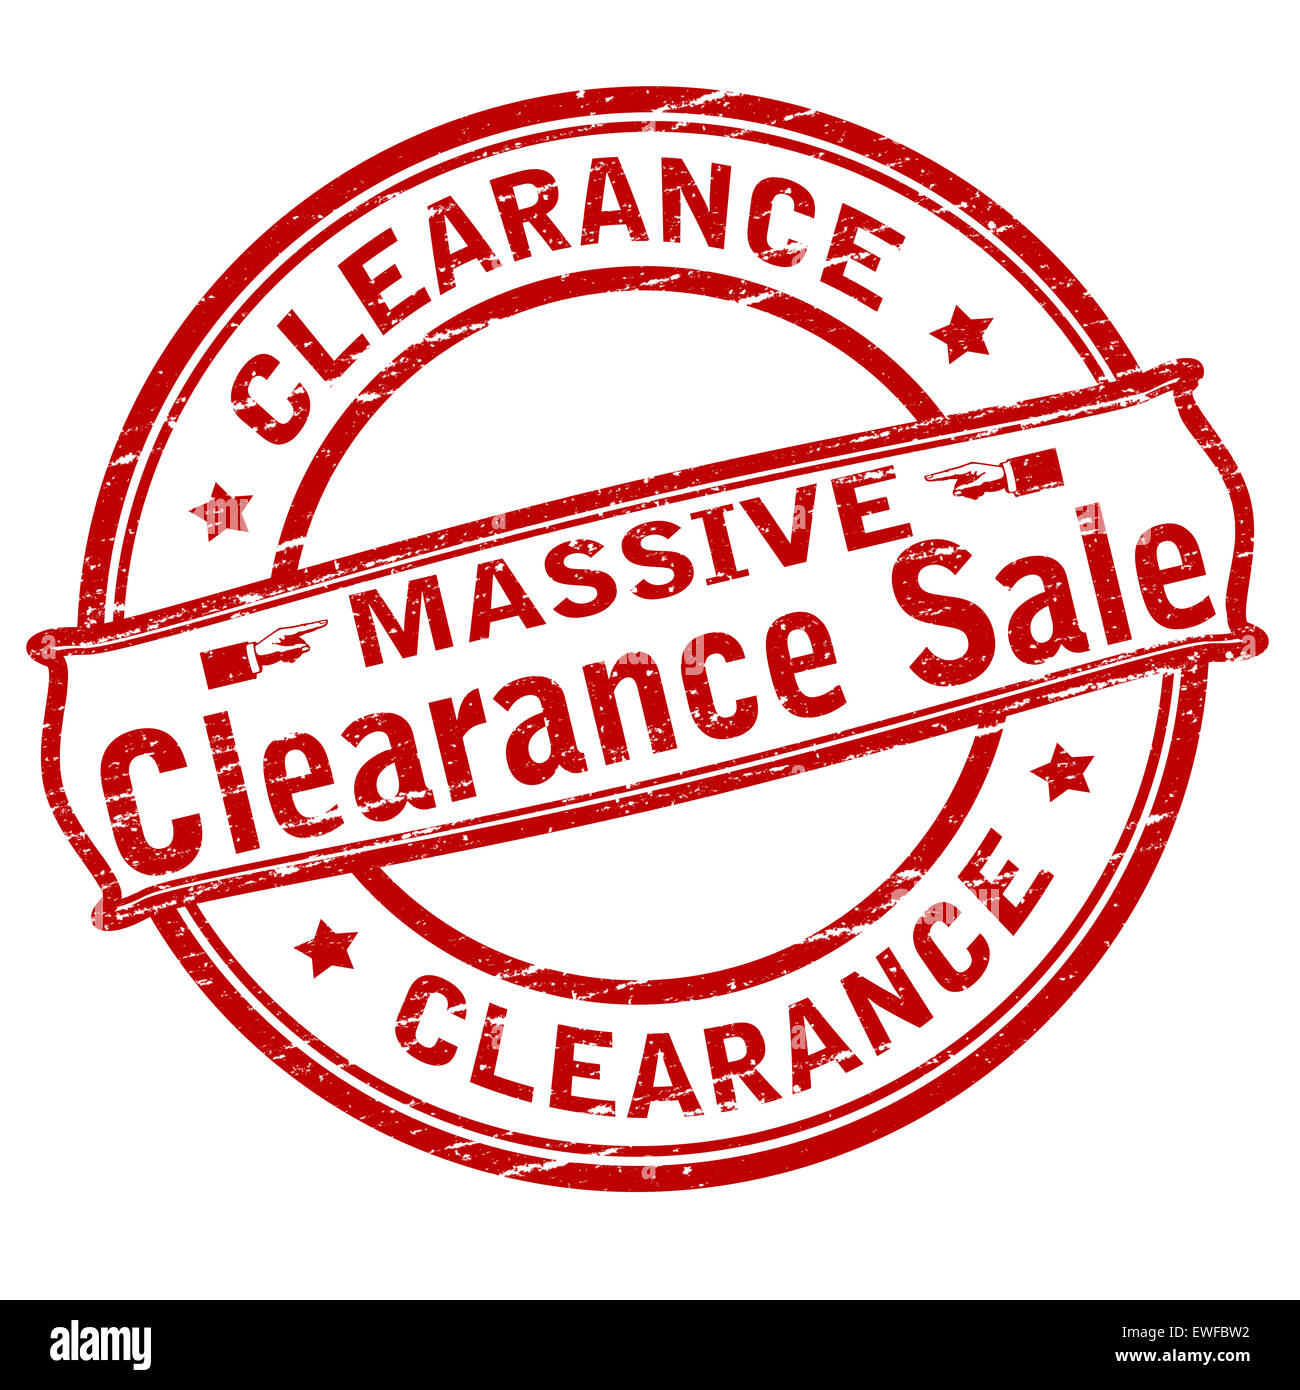 Clearance sale specials